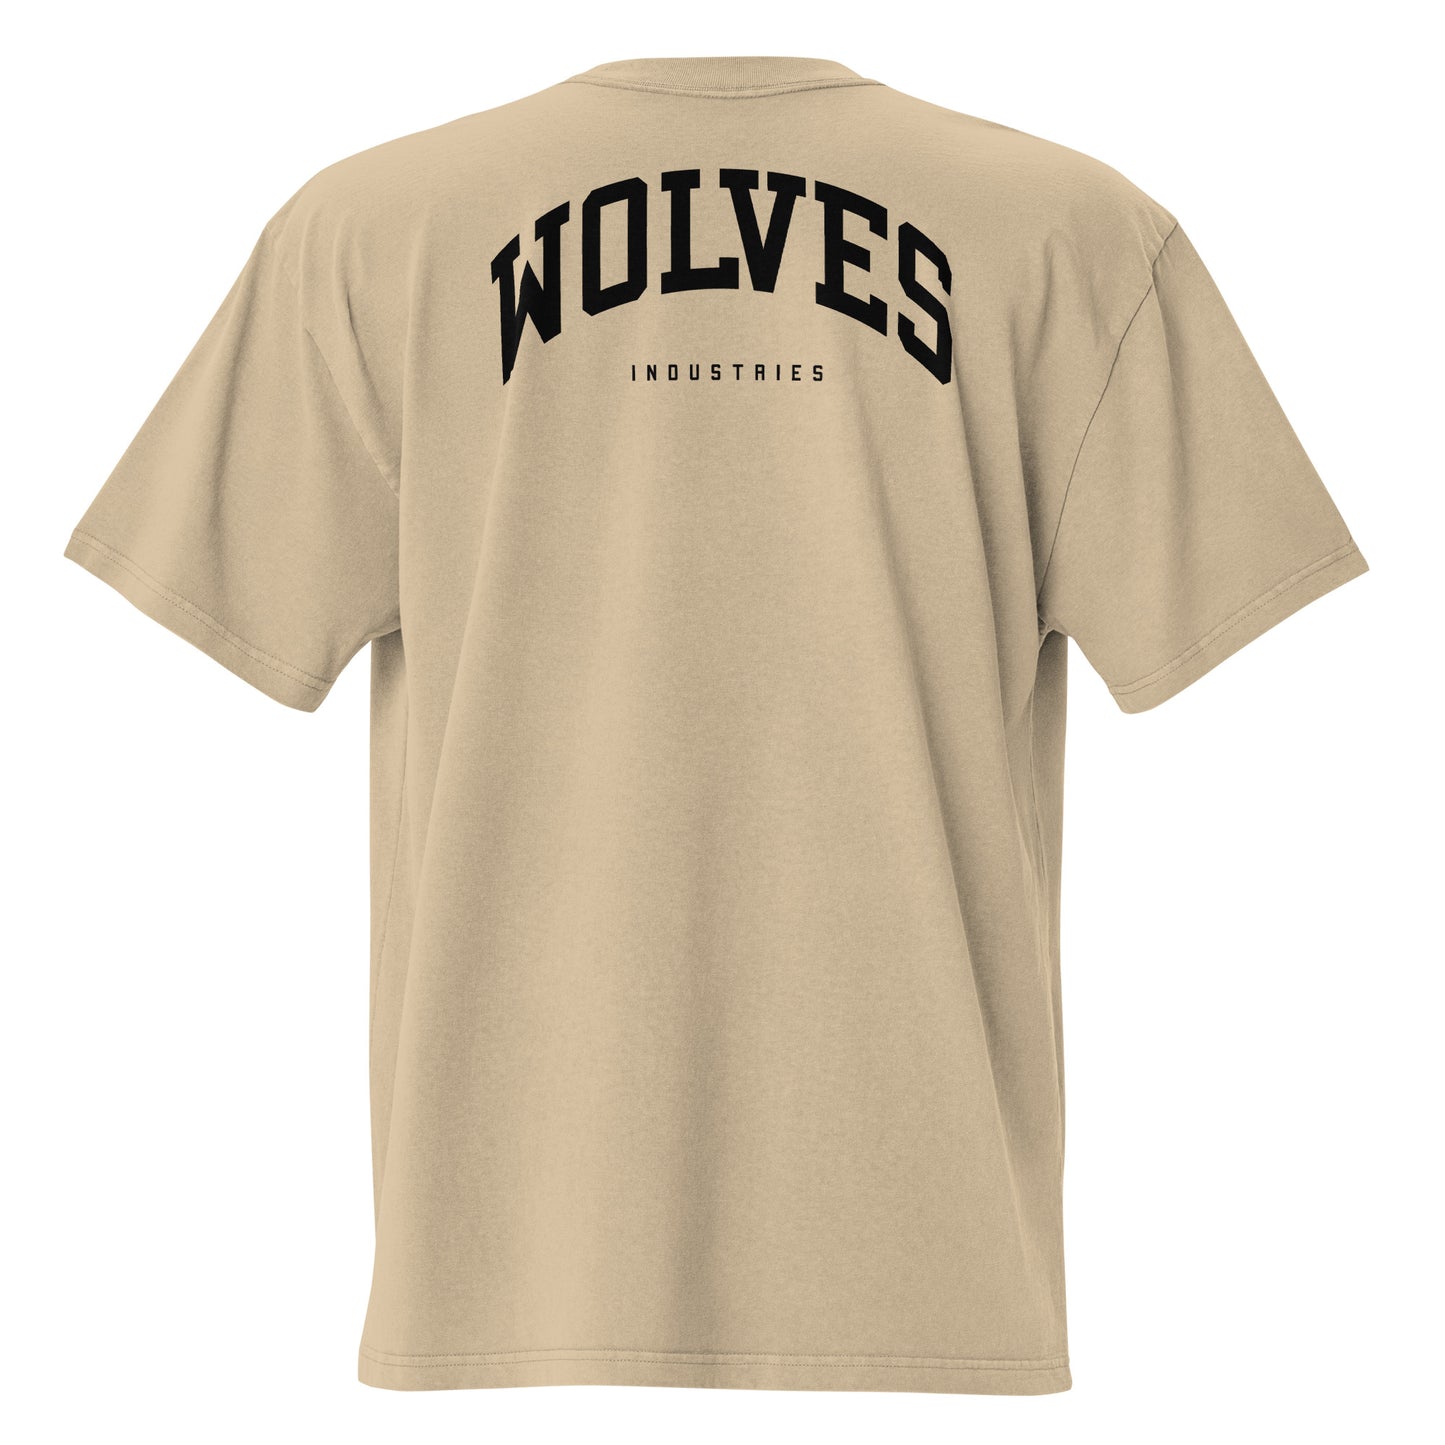 Wolves Industries GAU Oversized faded t-shirt